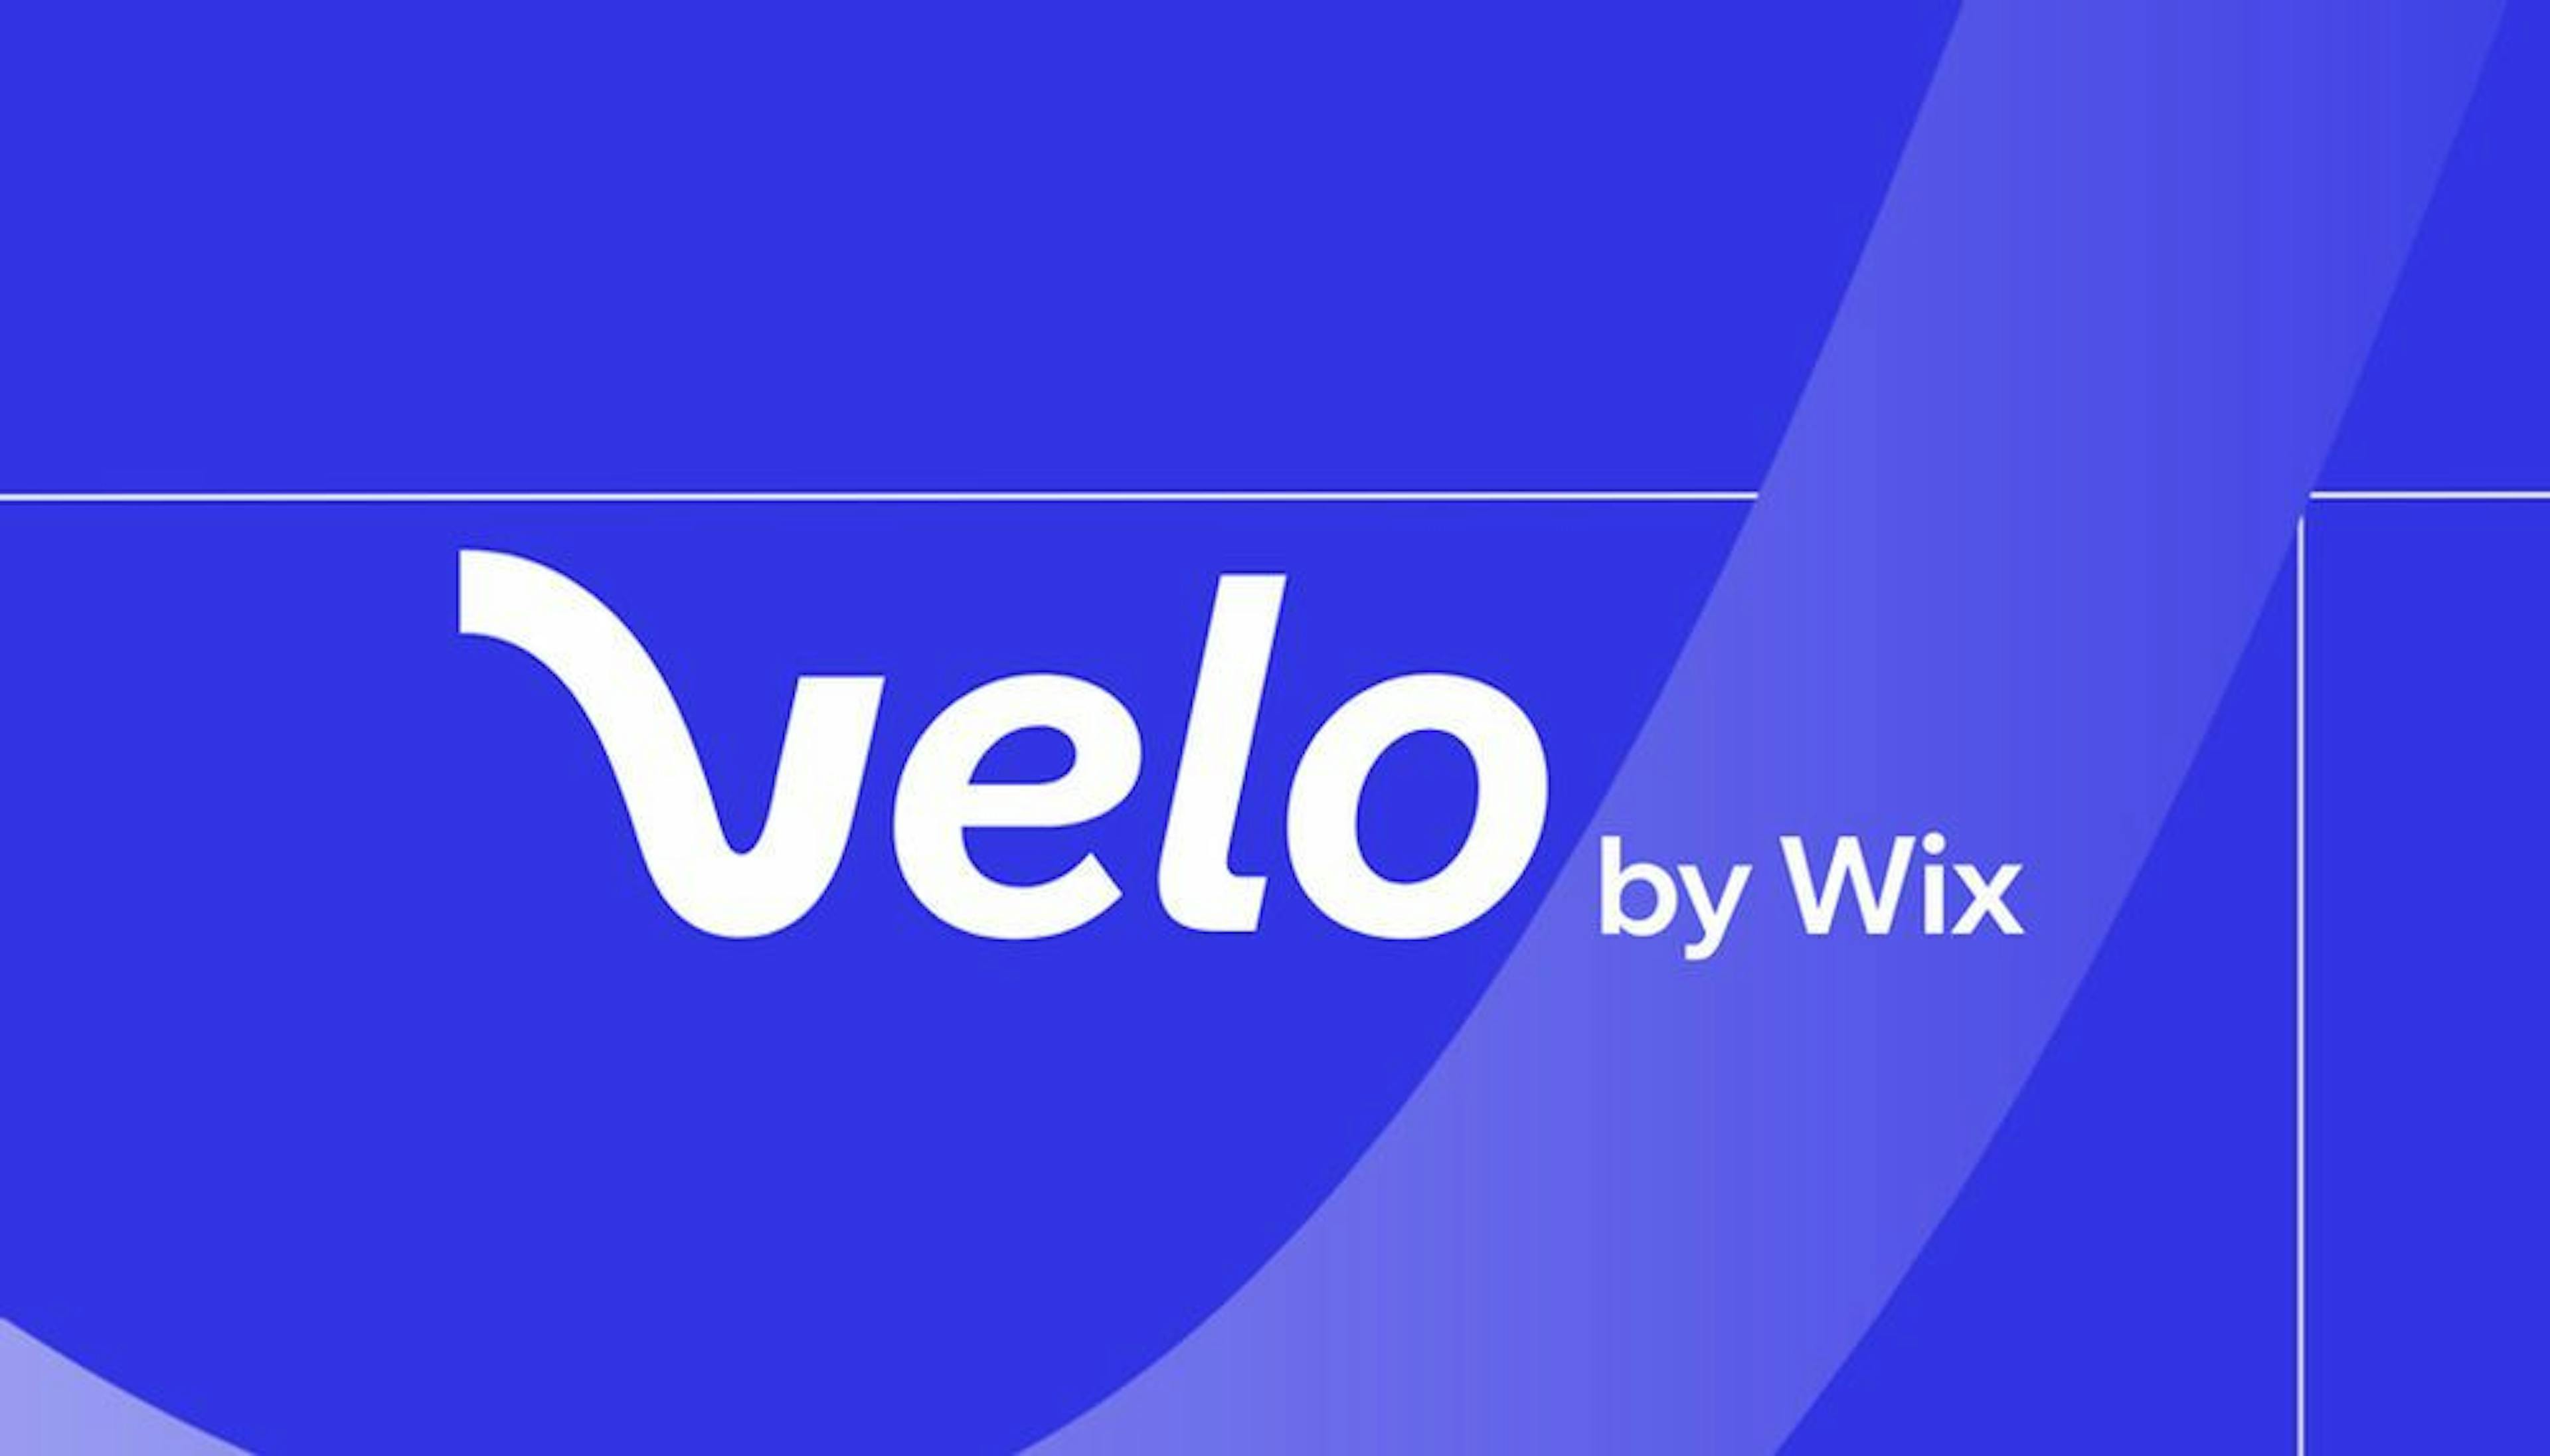 /step-by-step-guide-on-how-to-build-a-web-application-with-velo-q31y338j feature image